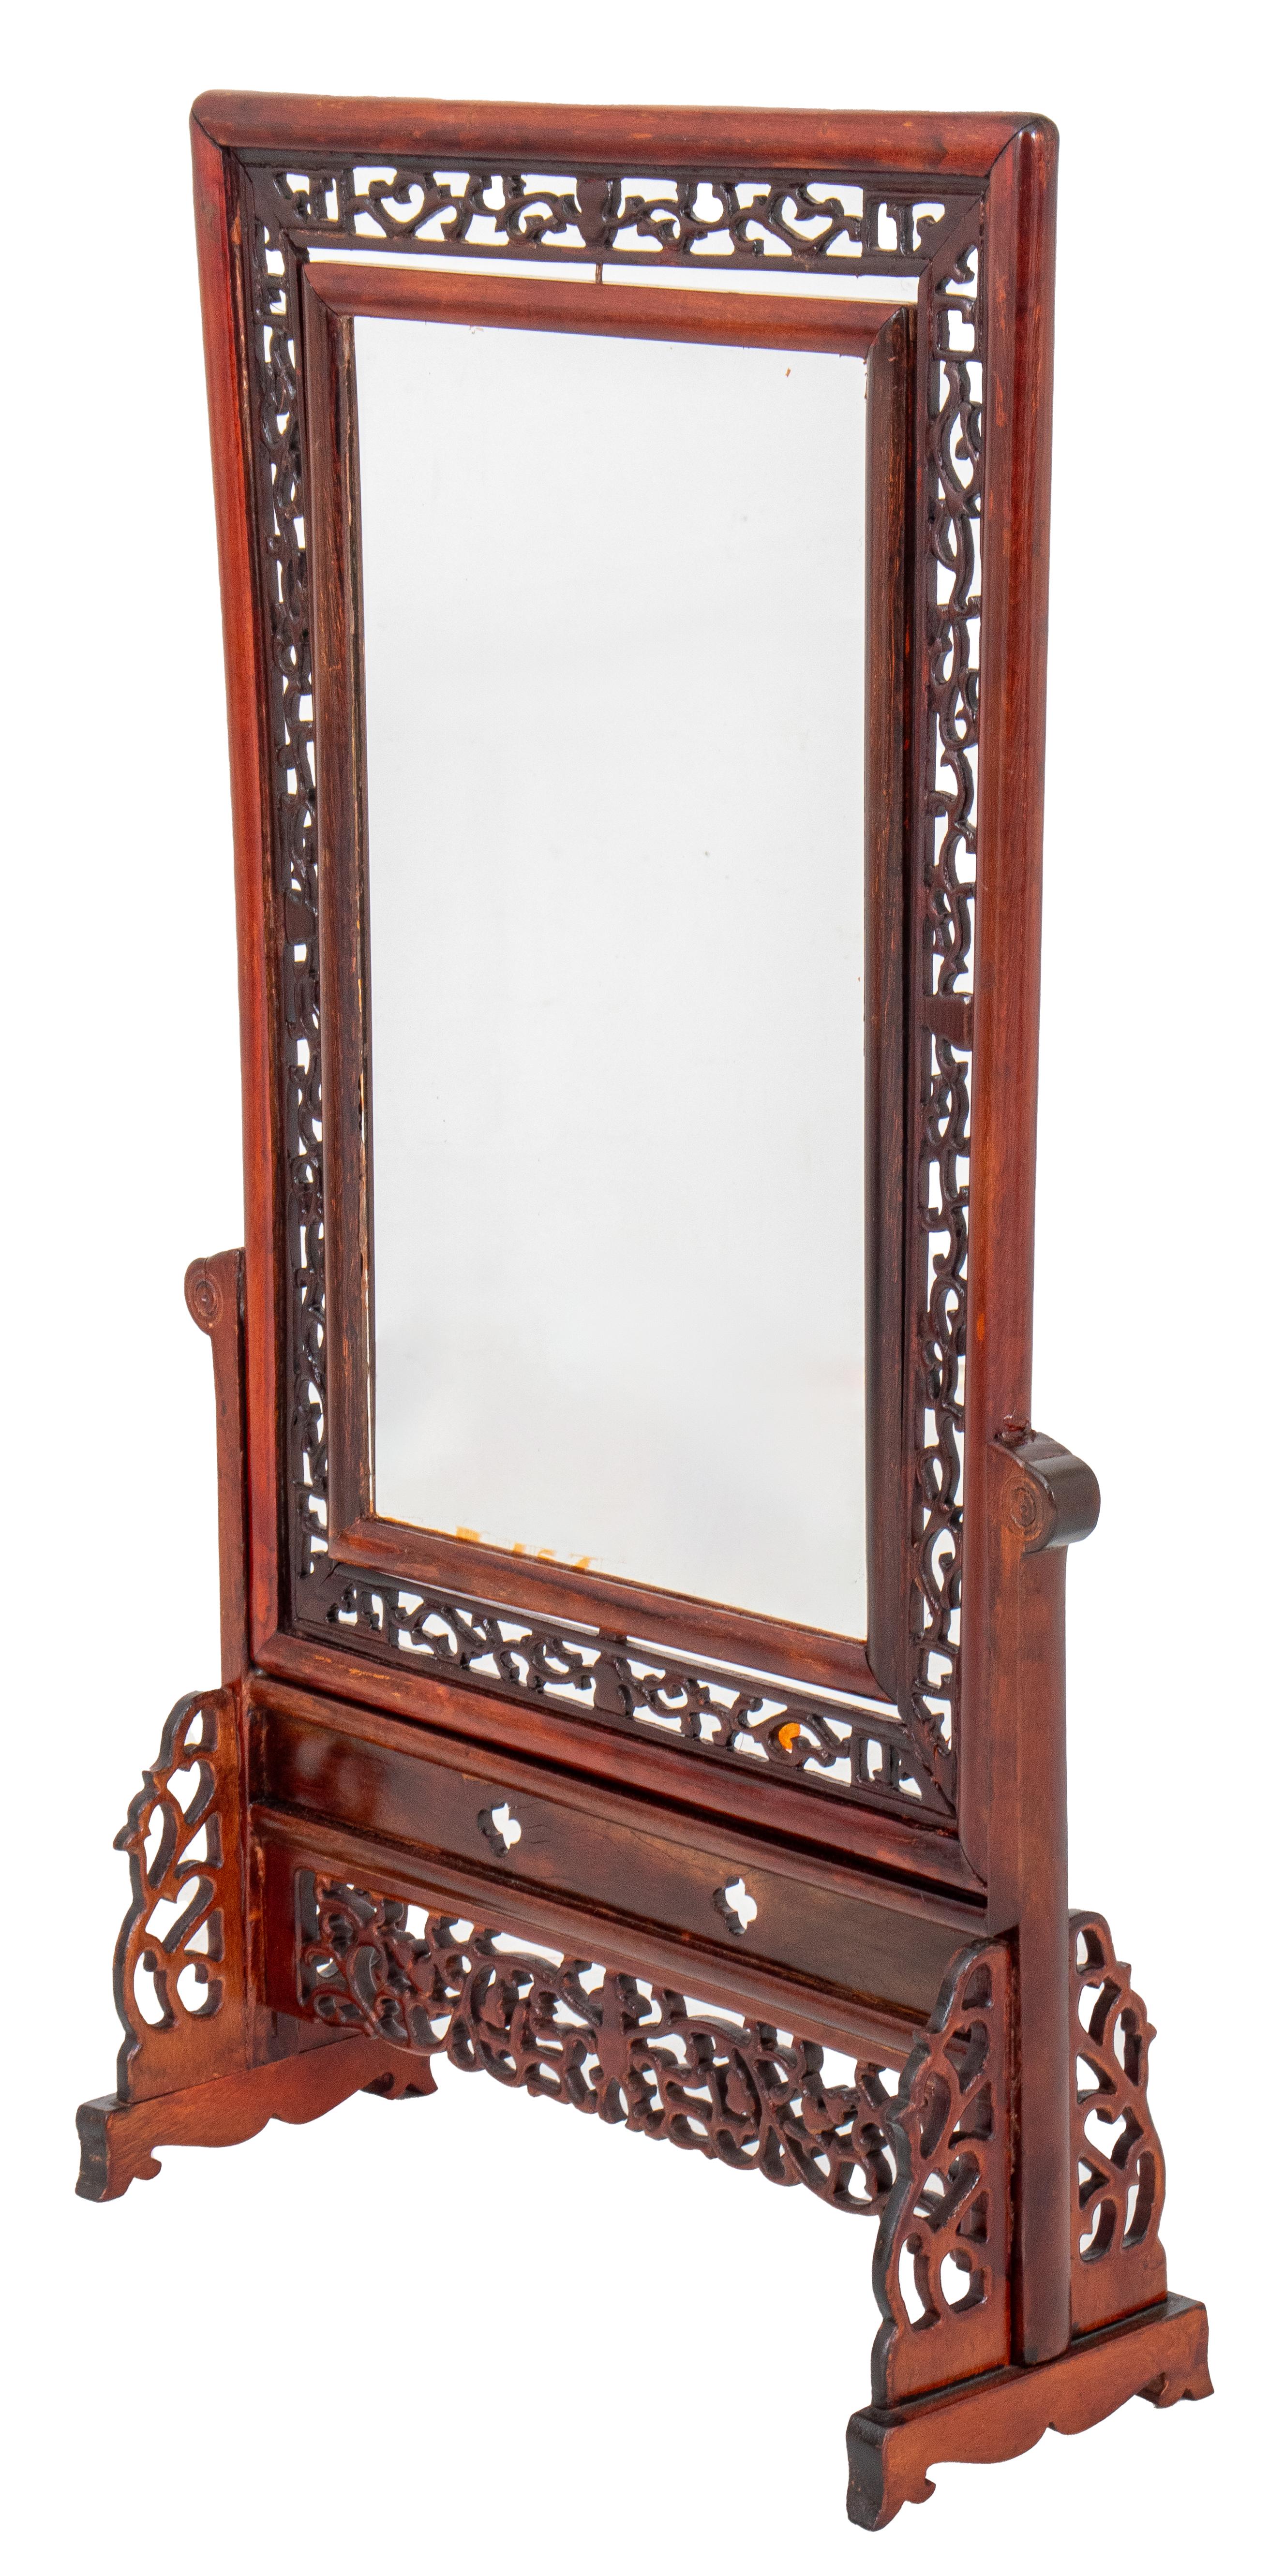 Chinese rosewood reticulated and hinged standing frame, the whole with floral decoration, the glass mounted frame fully turnable, with two volute support feet similarly carved.

Dealer: S138XX